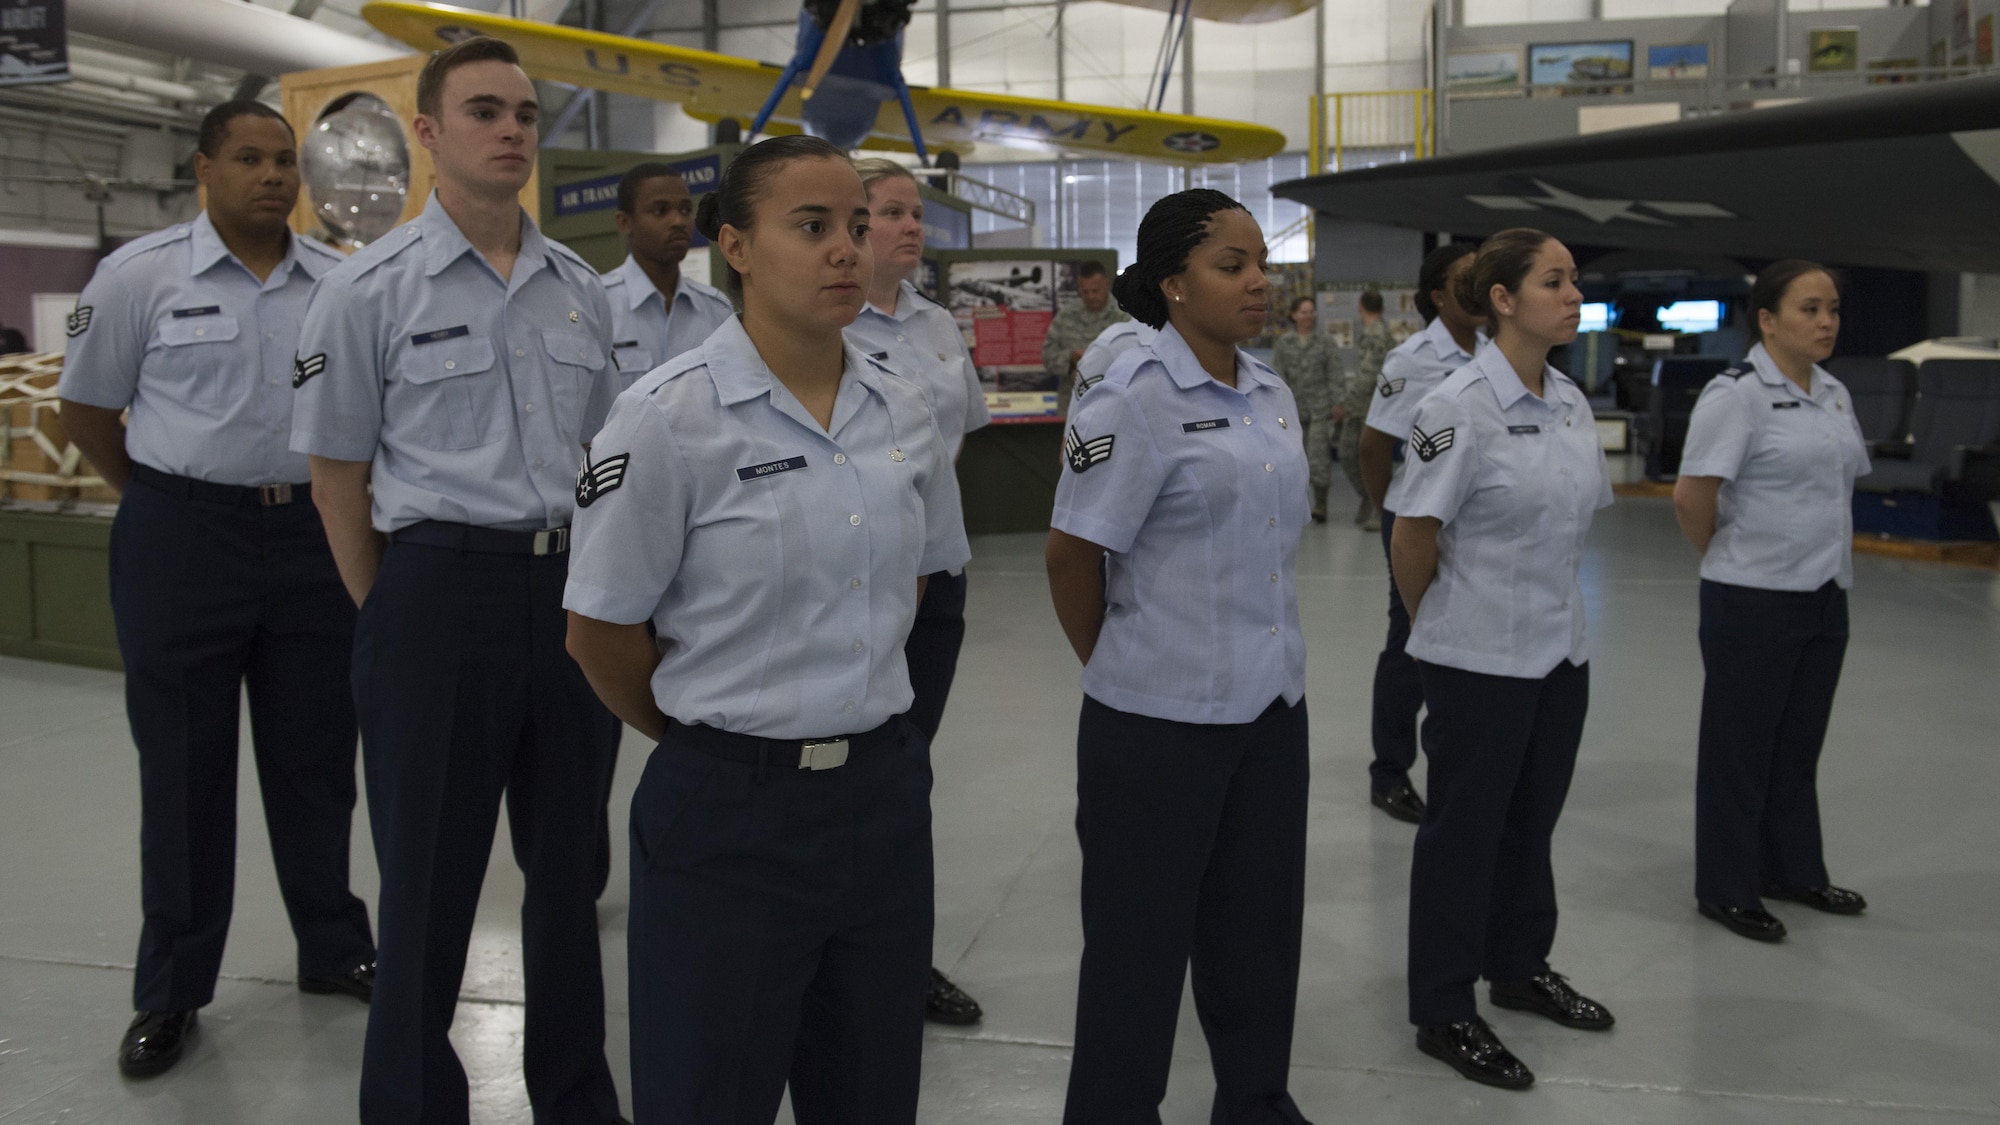 Airmen from the 436th Dental Squadron stand in formation during the 436th Dental Squadron Inactivation Ceremony on June 28, 2016, at the Air Mobility Command Museum on Dover Air Force Base, Del. The Dover AFB Dental Clinic will remain open and operate normally; costumers will experience no interruption in dental services. (U.S. Air Force photo/Senior Airman Zachary Cacicia)